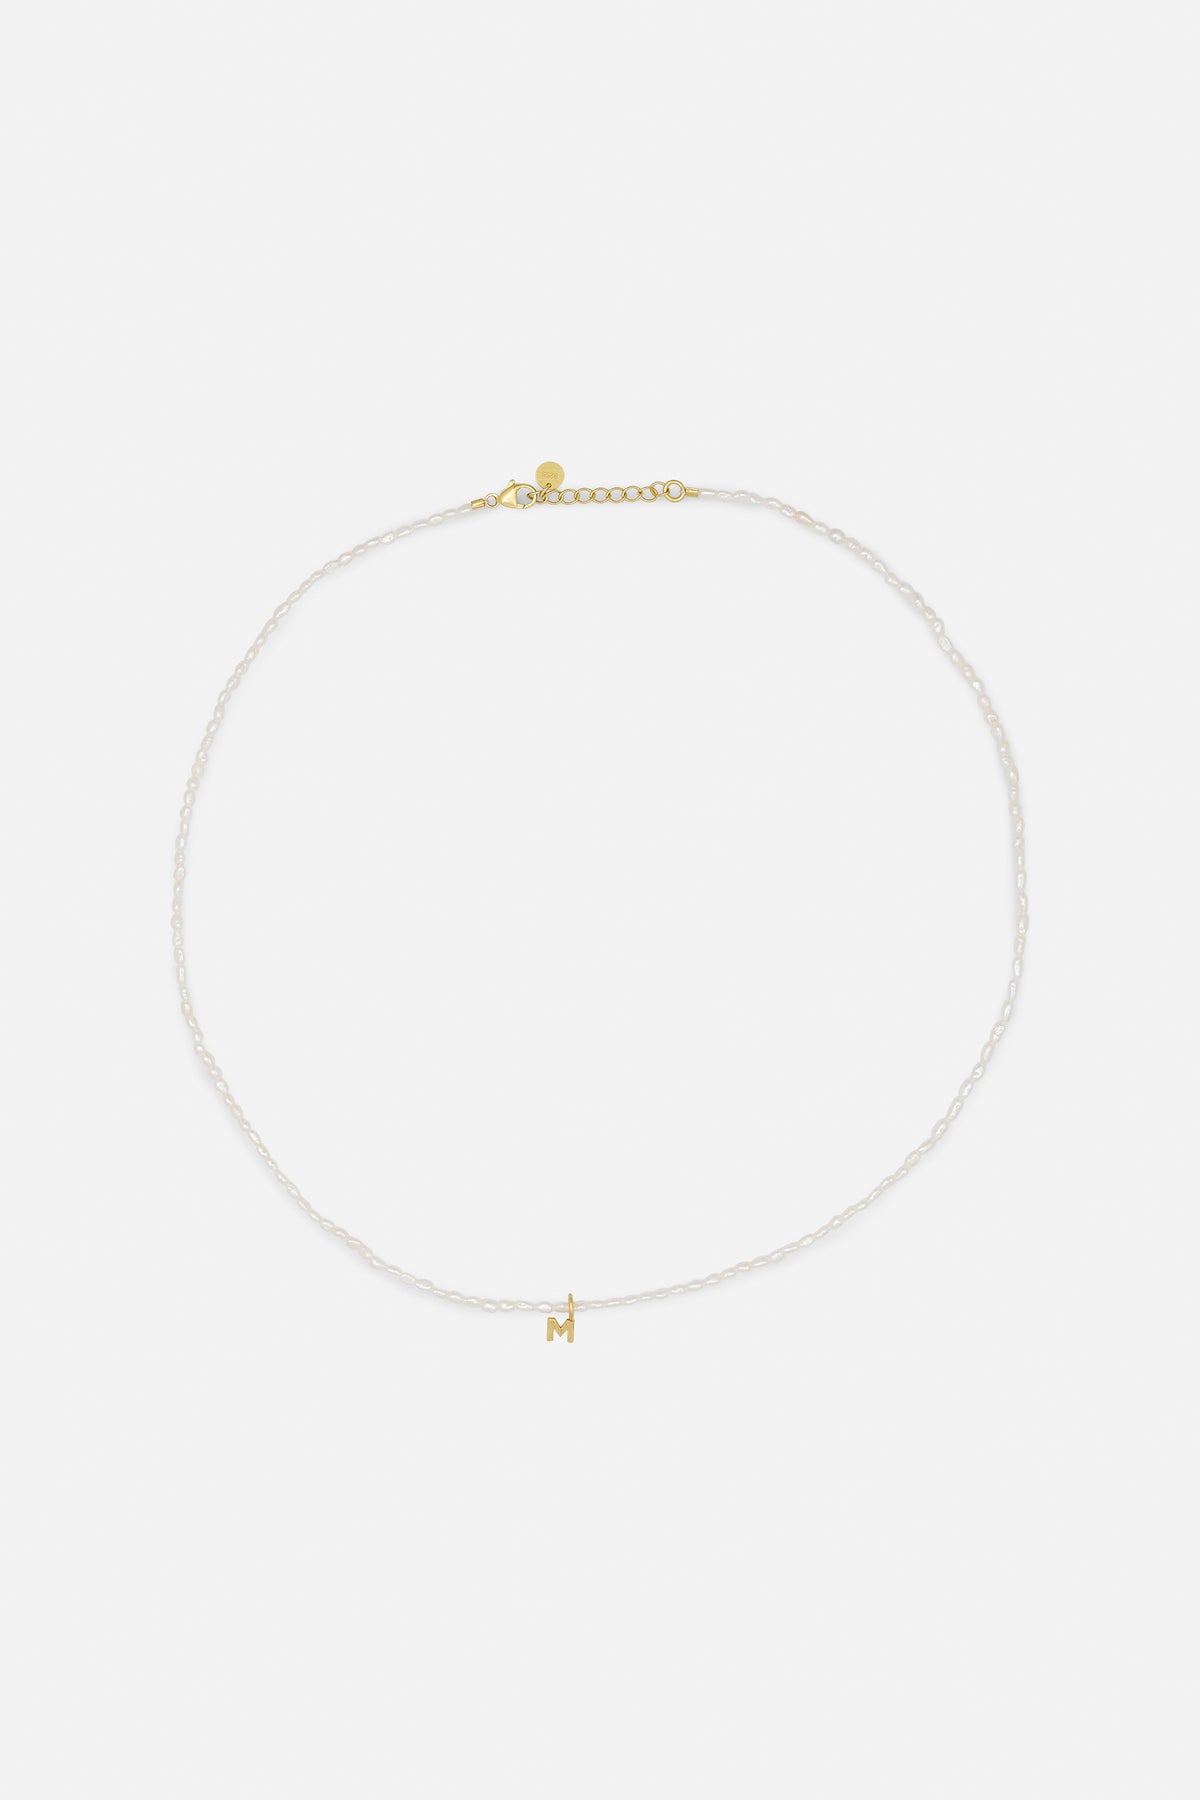 Sorelle ApS Pearly letter necklace - Forgyldt Necklace